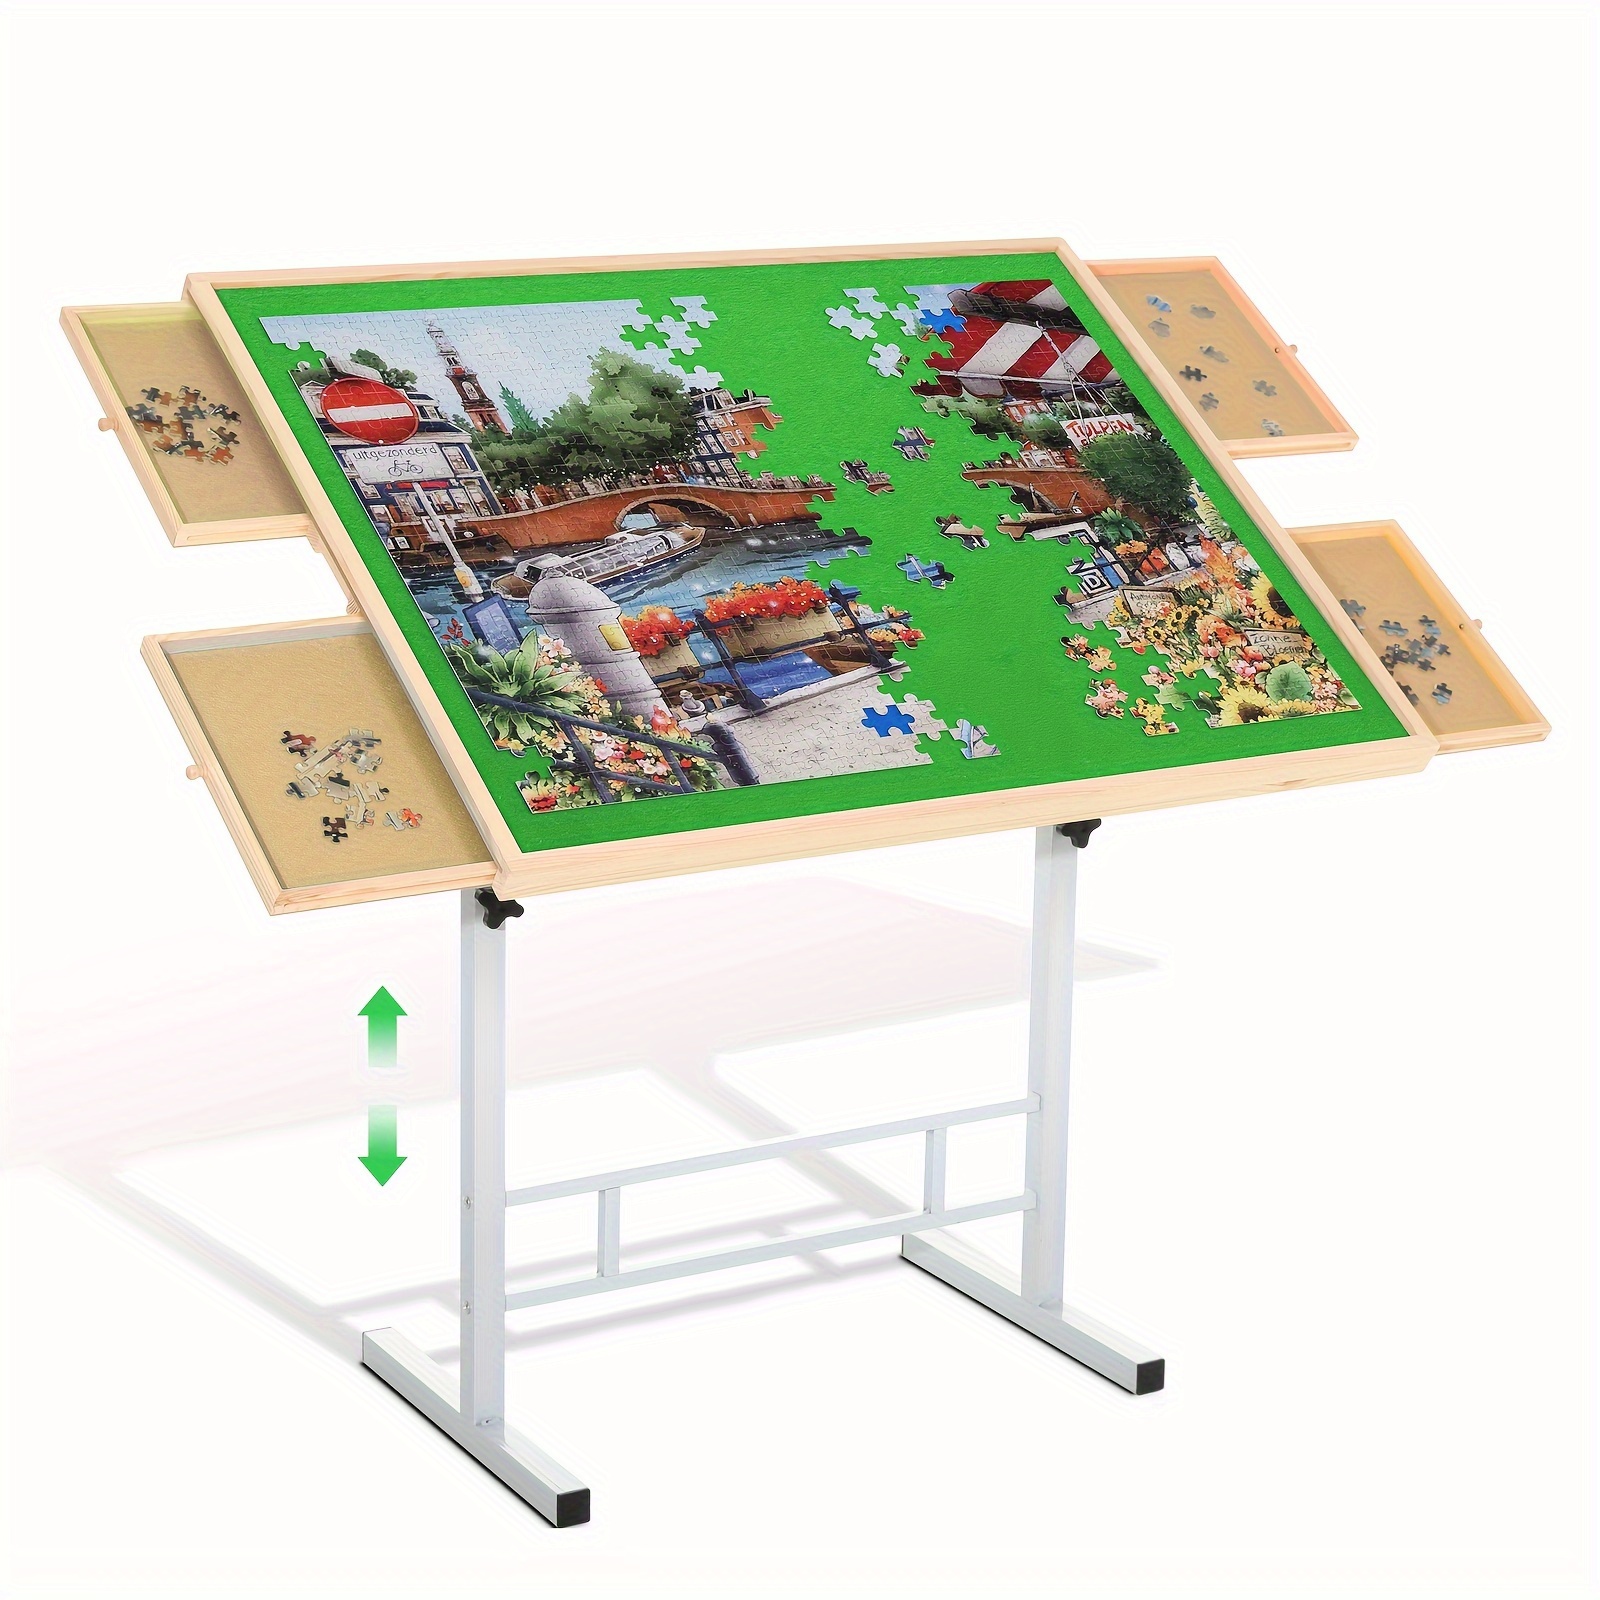 

Puzzle Table With 4 Drawers For 1500 Piece, Adjustable Angle & Height Table With Metal Legs | 35"x26" Tilting Puzzle Board For People With Neck Or Christmas Gift